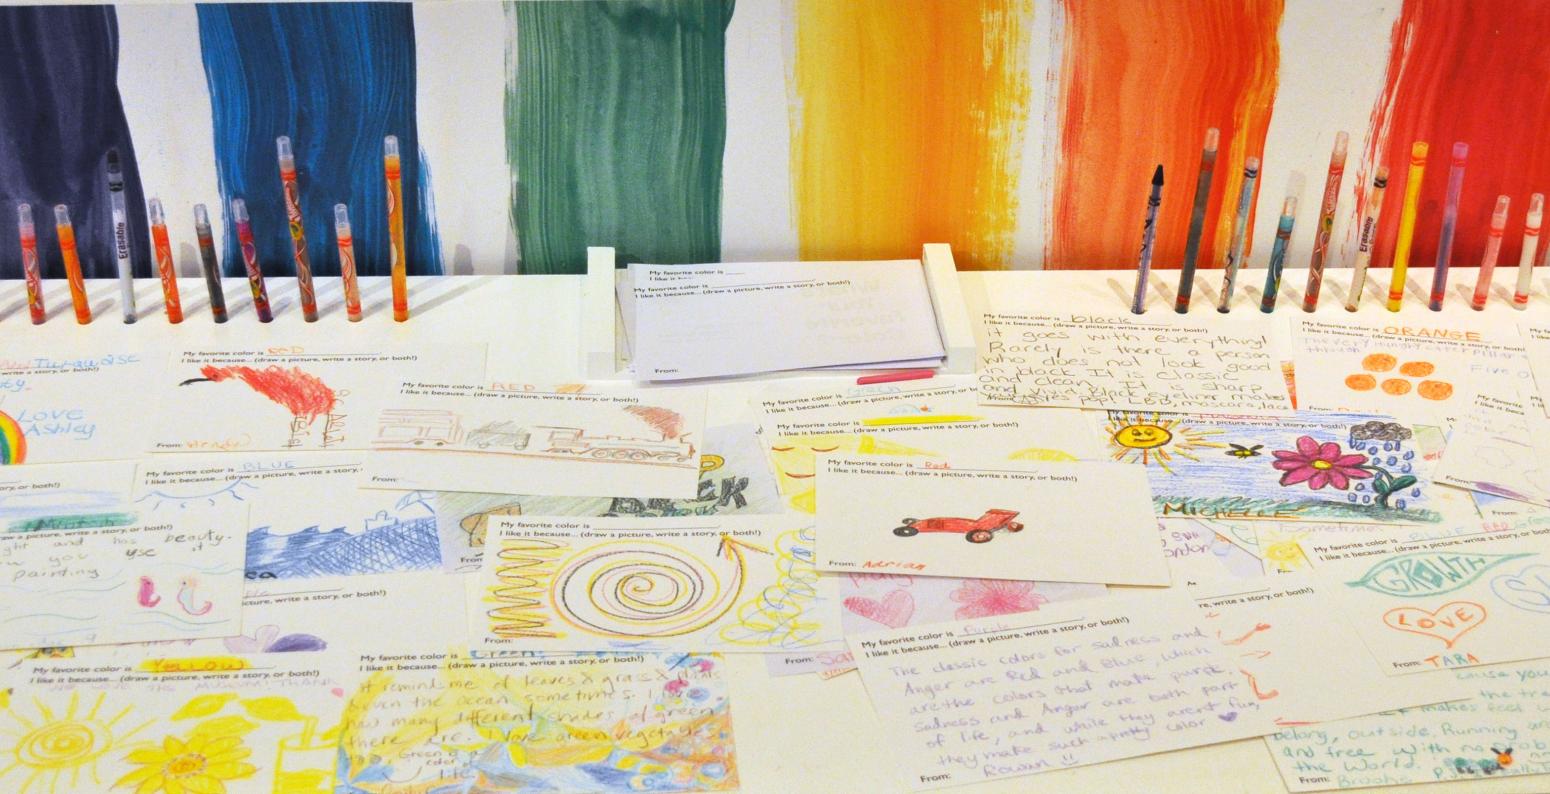 A table with the colors of the rainbow behind it, with colored pencils and postcards with drawings on them.